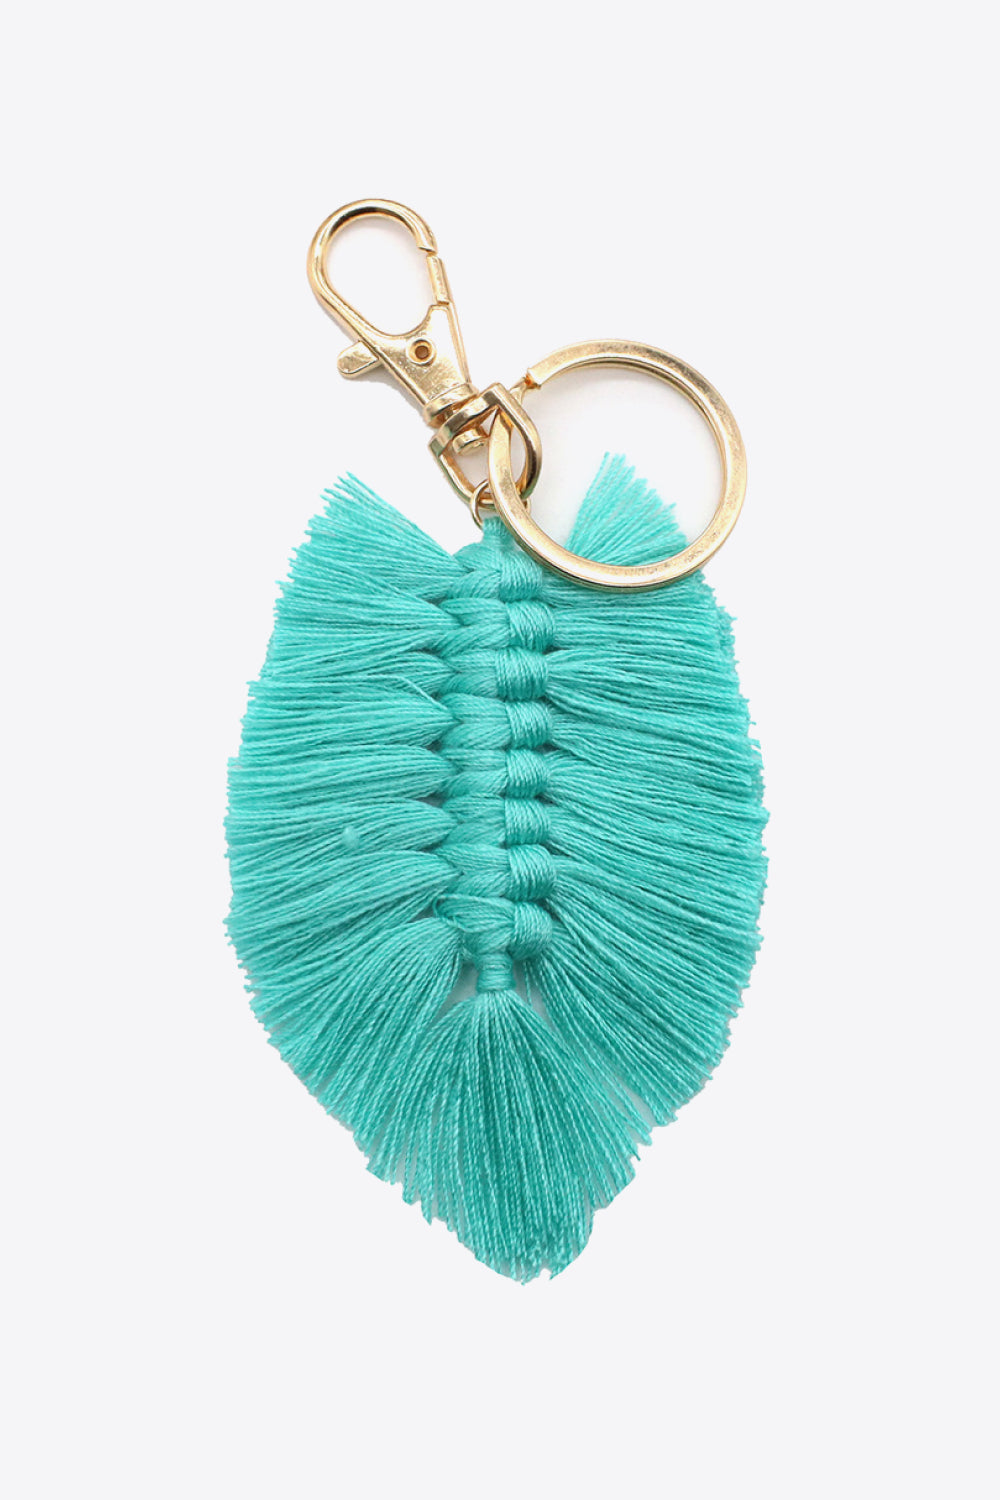 Trendsi Cupid Beauty Supplies Turquoise / One Size Keychains Assorted 4-Pack Leaf Shape Fringe Keychain